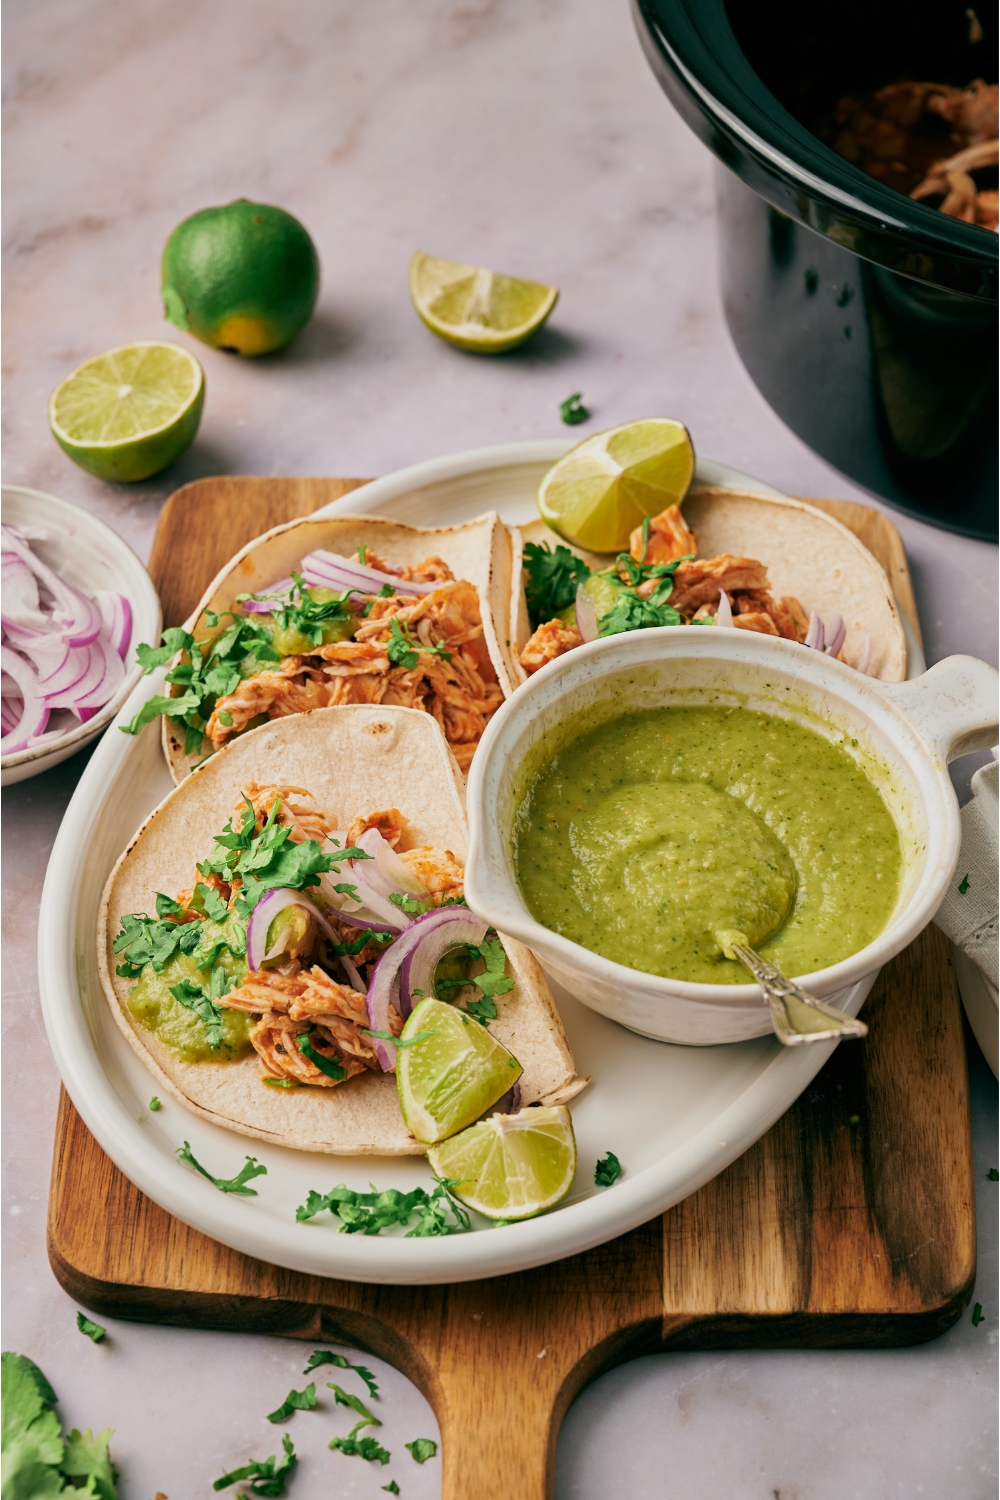 A plate with three shredded chicken tacos topped with sliced red onion and cilantro with a bowl of green salsa and lime wedges on the plate.